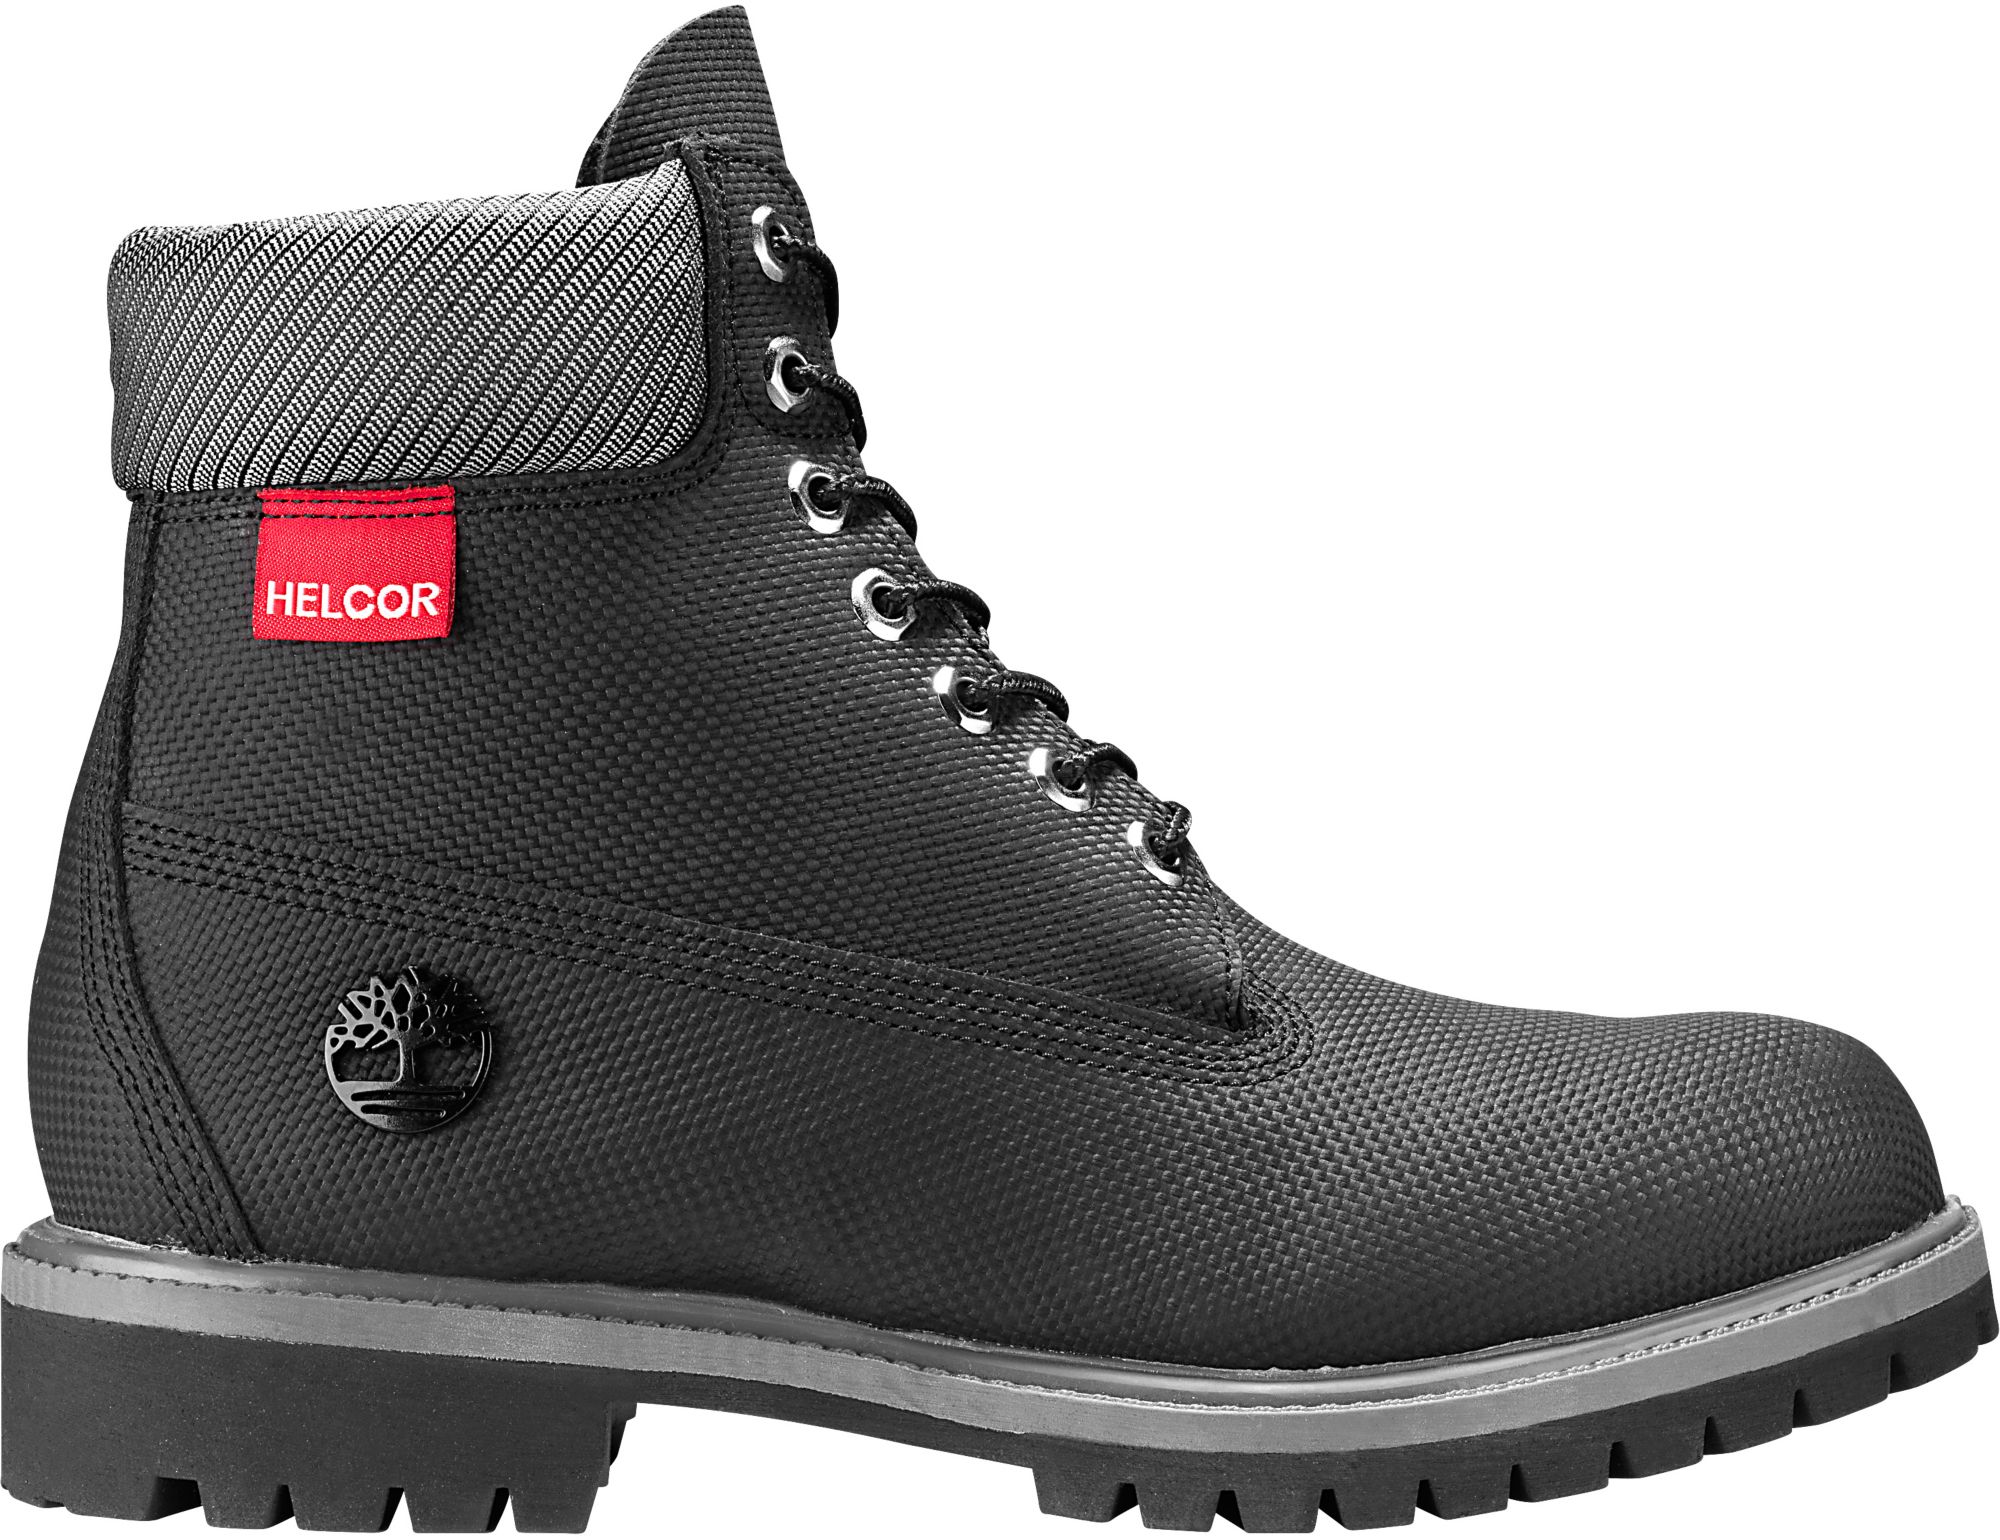 timberland winter shoes mens